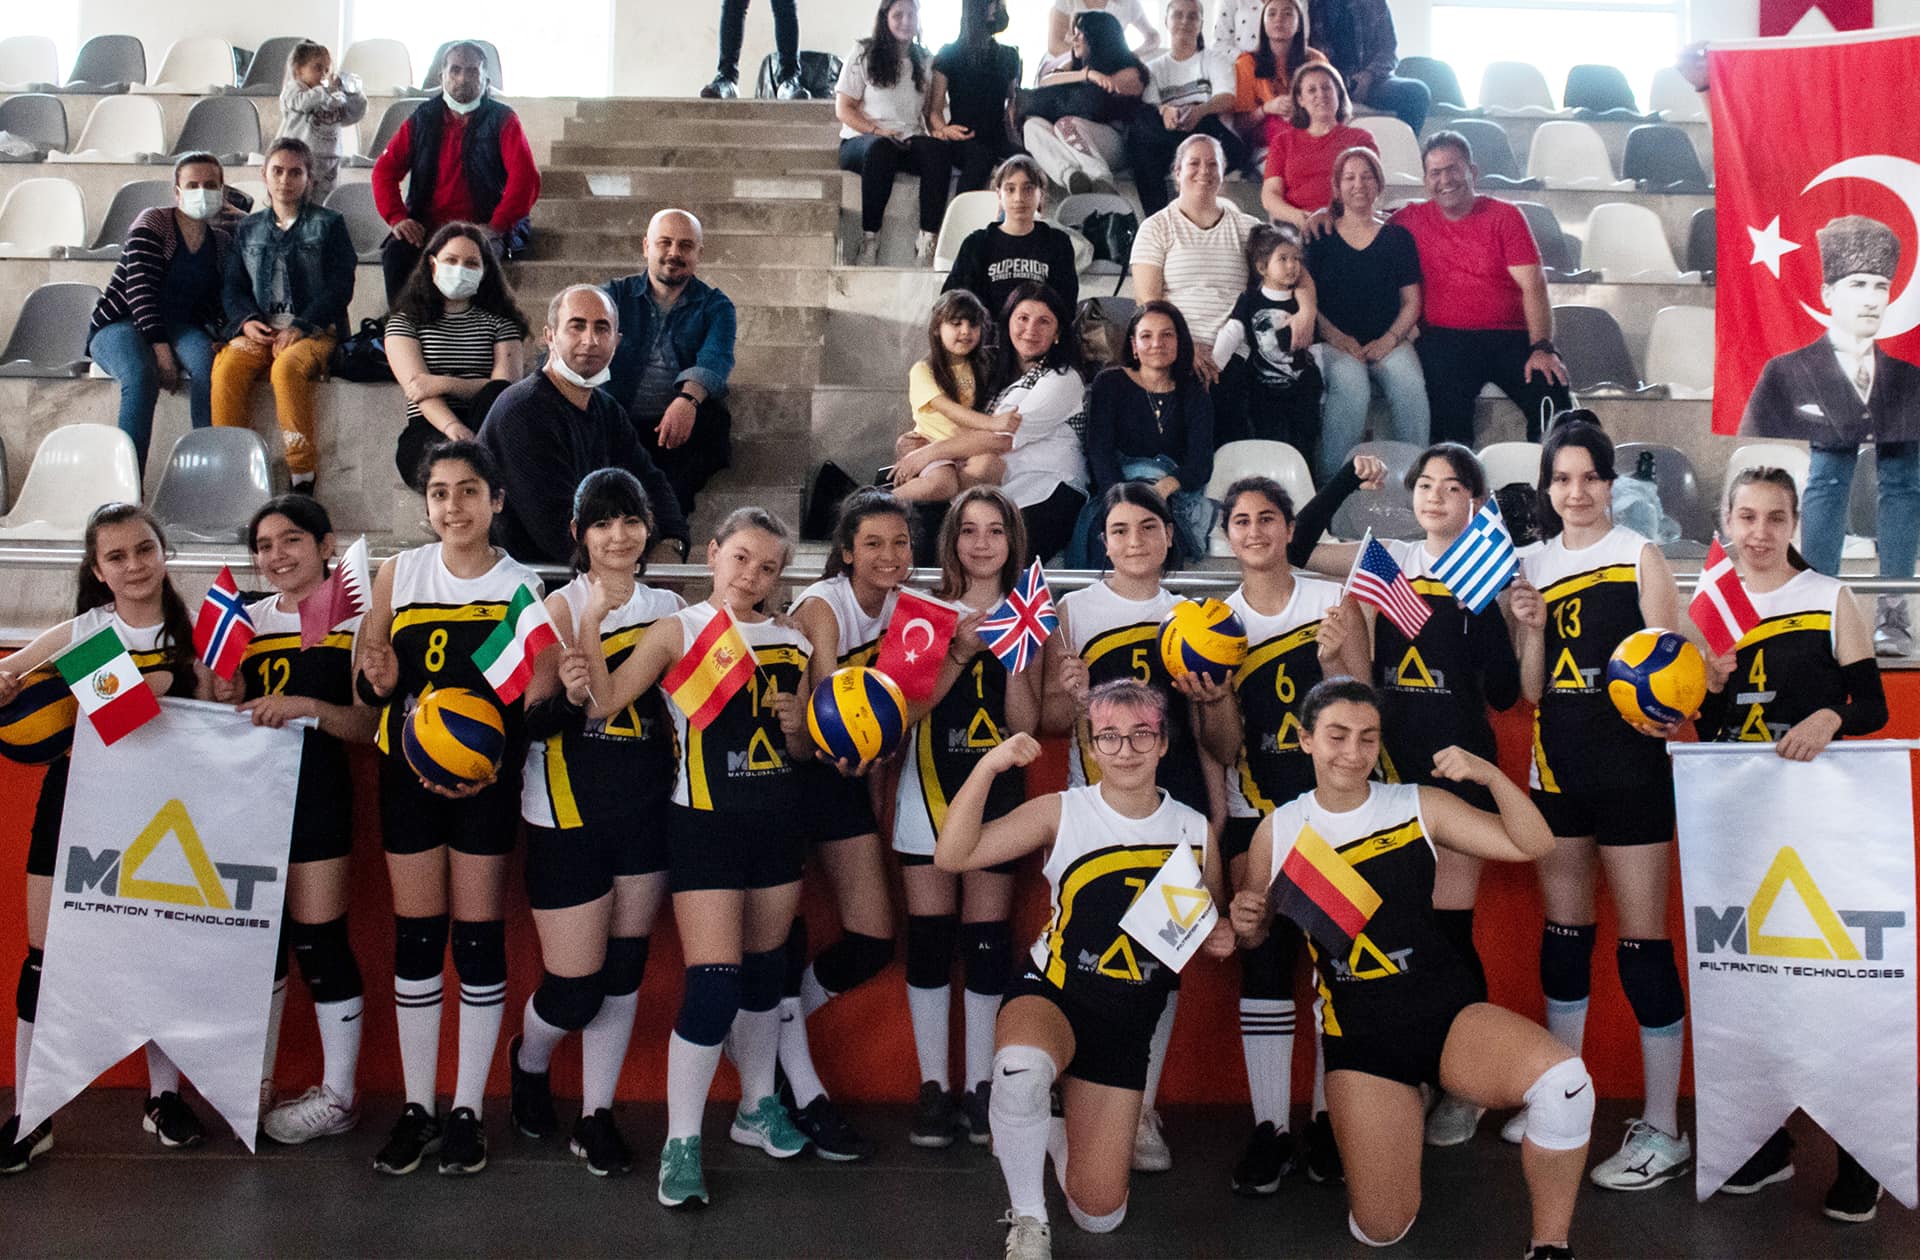 Read more about the article MAT’s Sponsored Volleyball Team Finishes 3rd. Happy Youth & Sports Day!